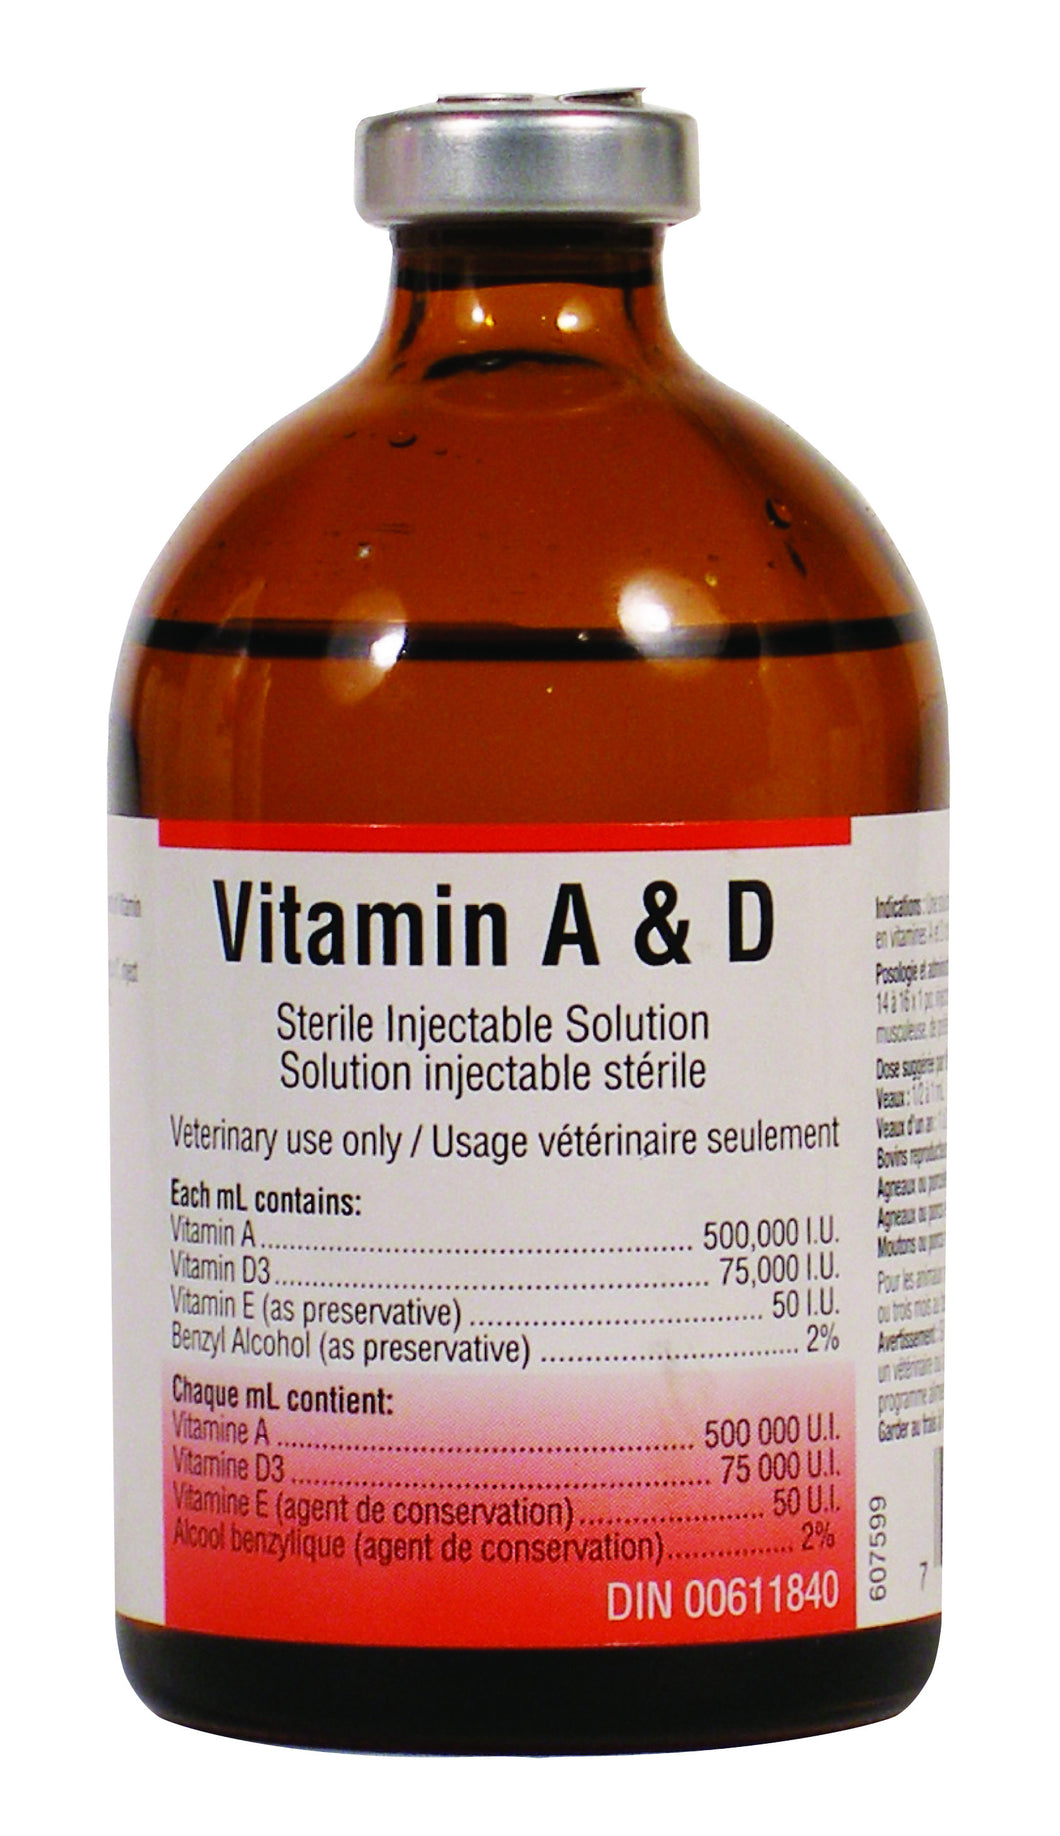 A&D INJECTABLE Cattle Supply Treatment of deficiencies in vitamin A and D in cattle, sheep and pigs.